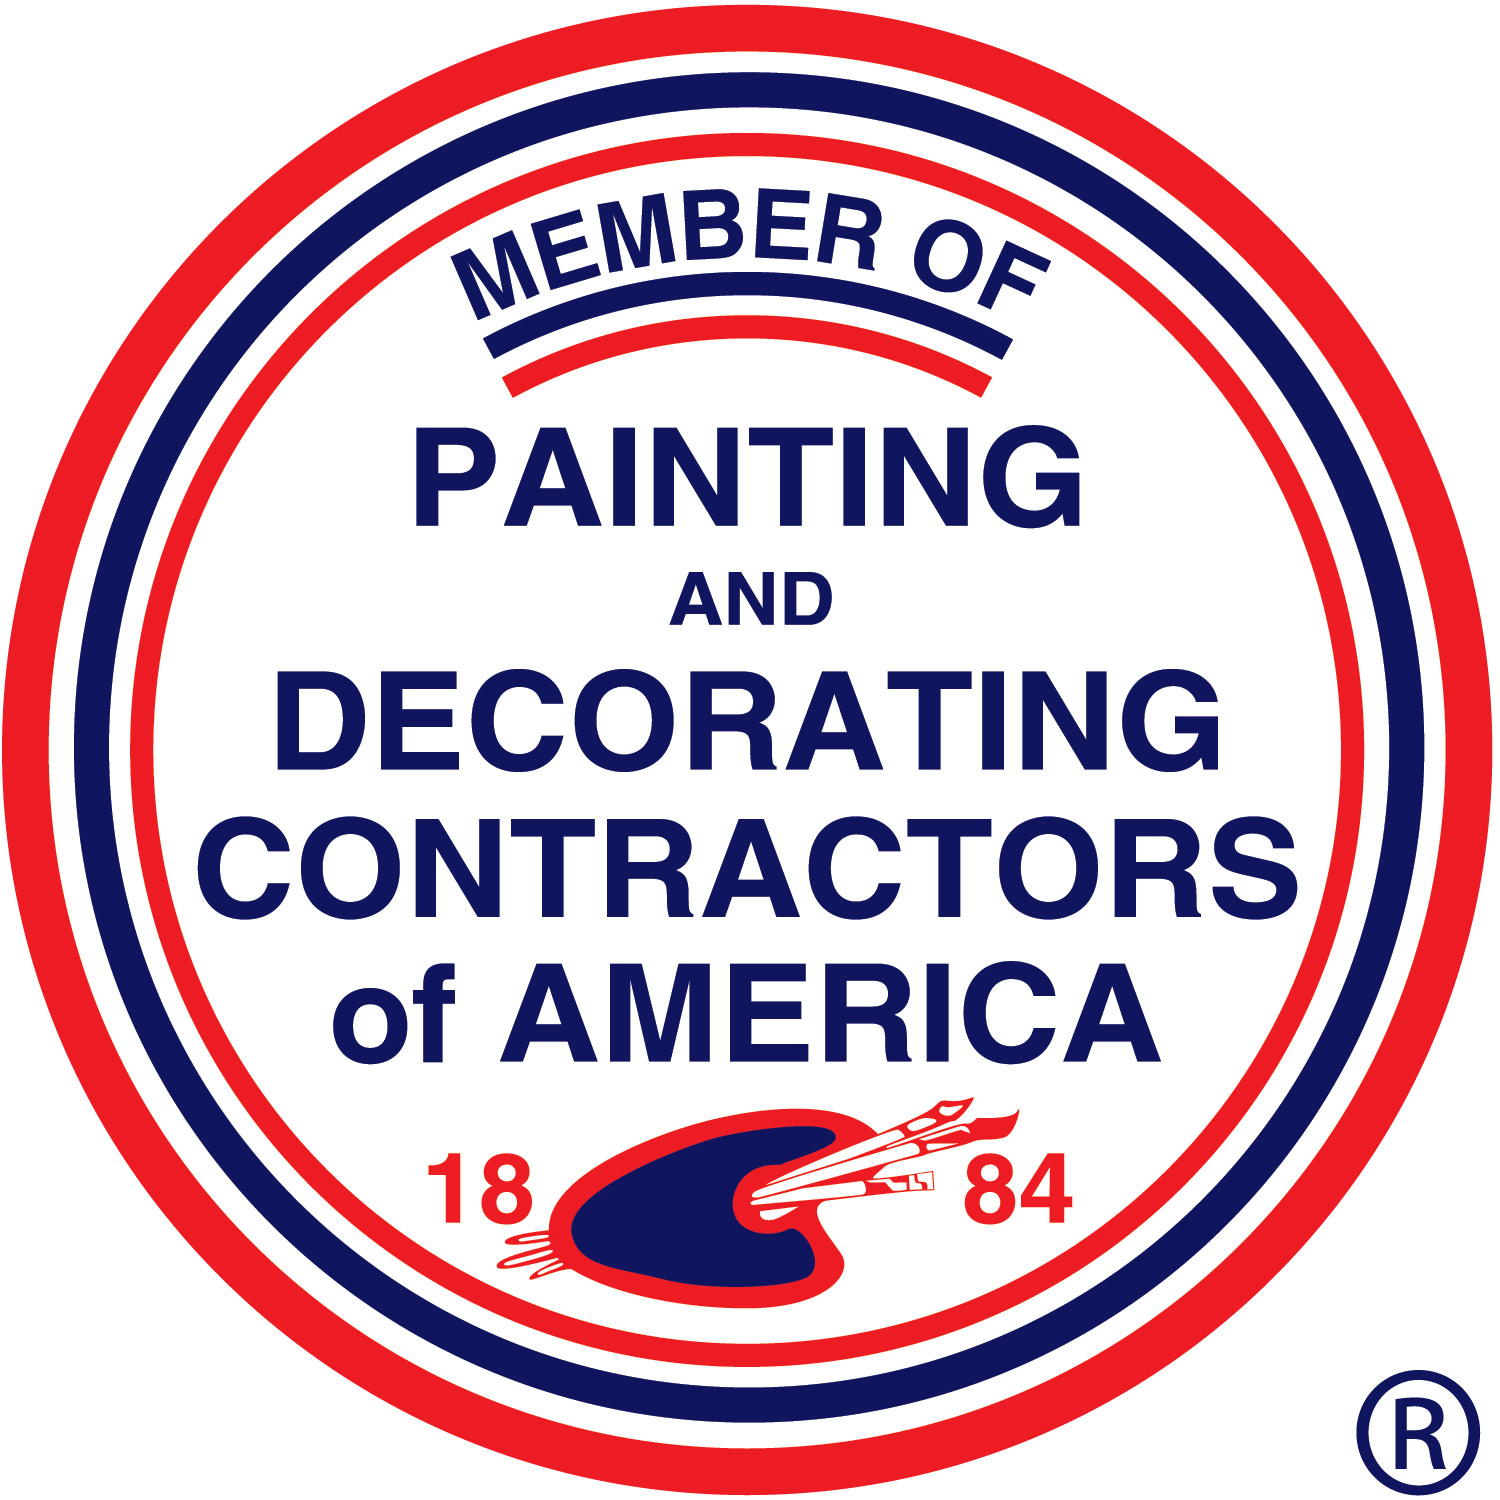 MEMBER OF PAINTING AND DECORATING CONTRACTORS OF AMERICA